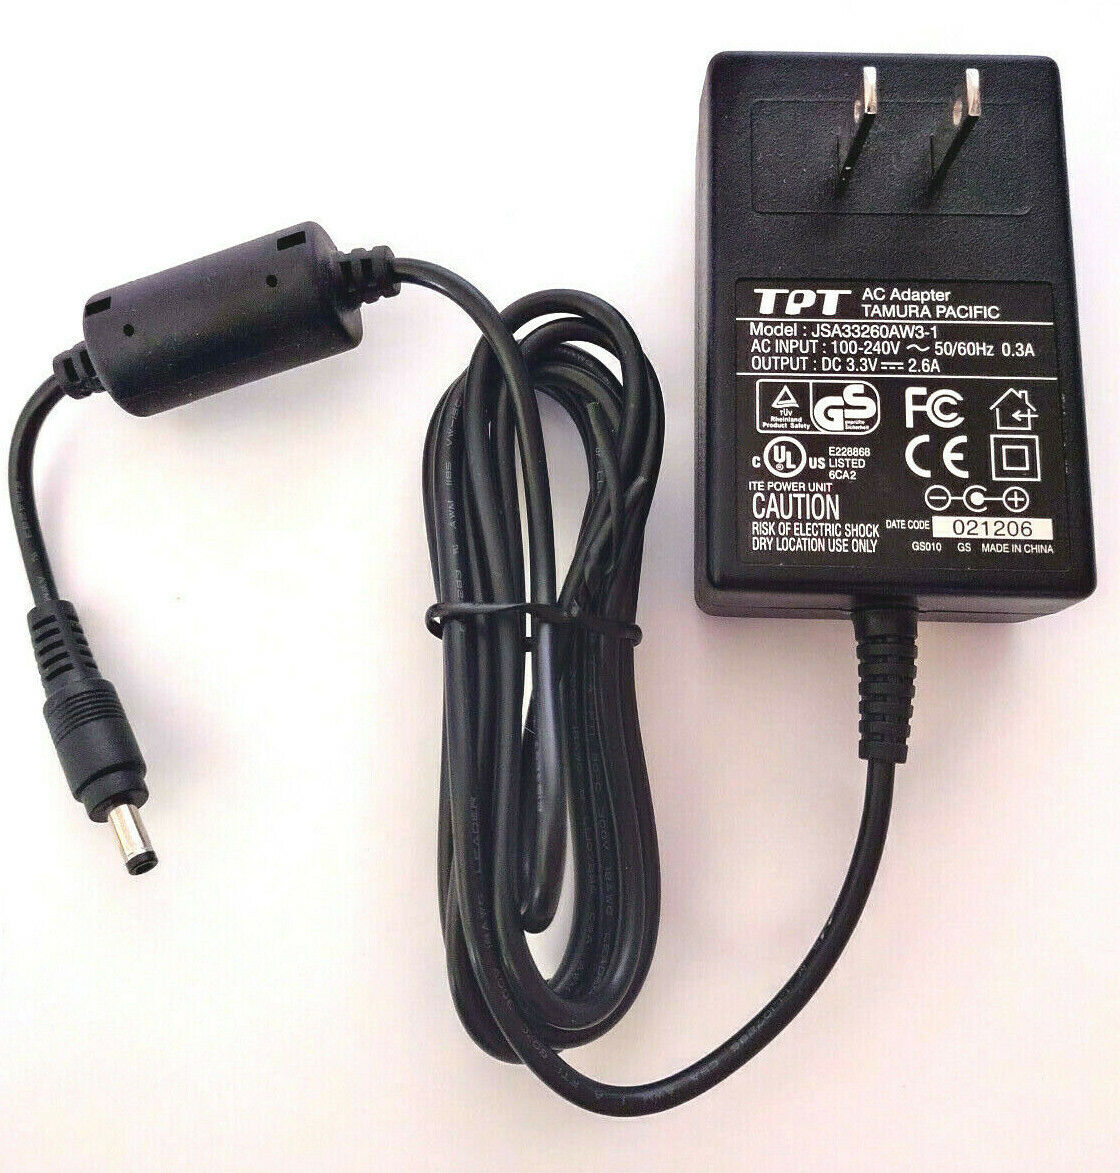 *Brand NEW* Transformer Charger TPT JSA33260AW3-1 AC Adapter DC 3V 2.6 ITE Power Supply - Click Image to Close